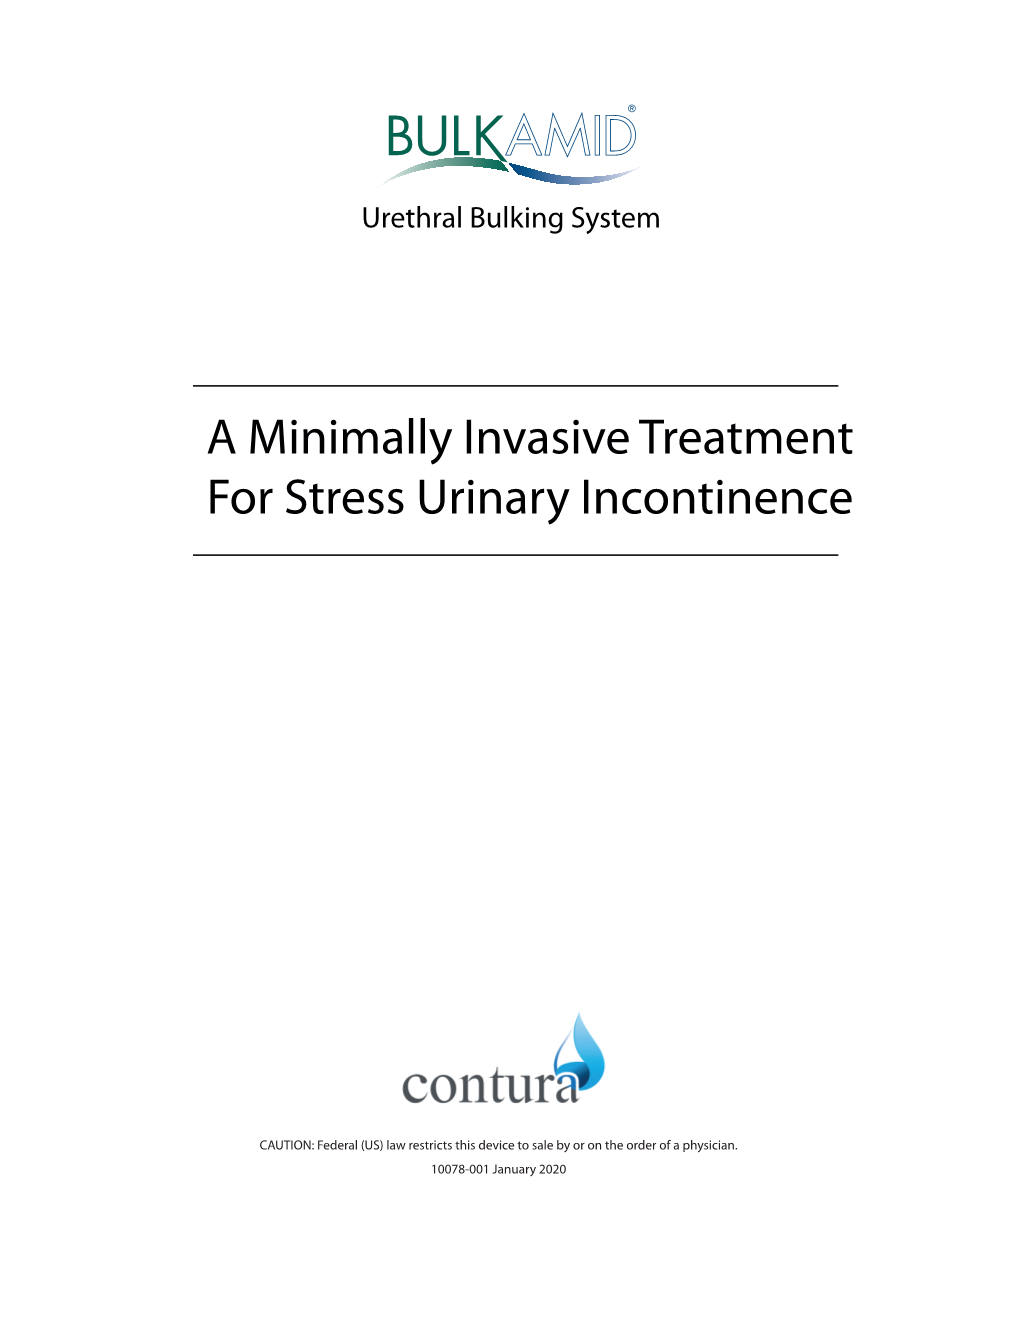 A Minimally Invasive Treatment for Stress Urinary Incontinence